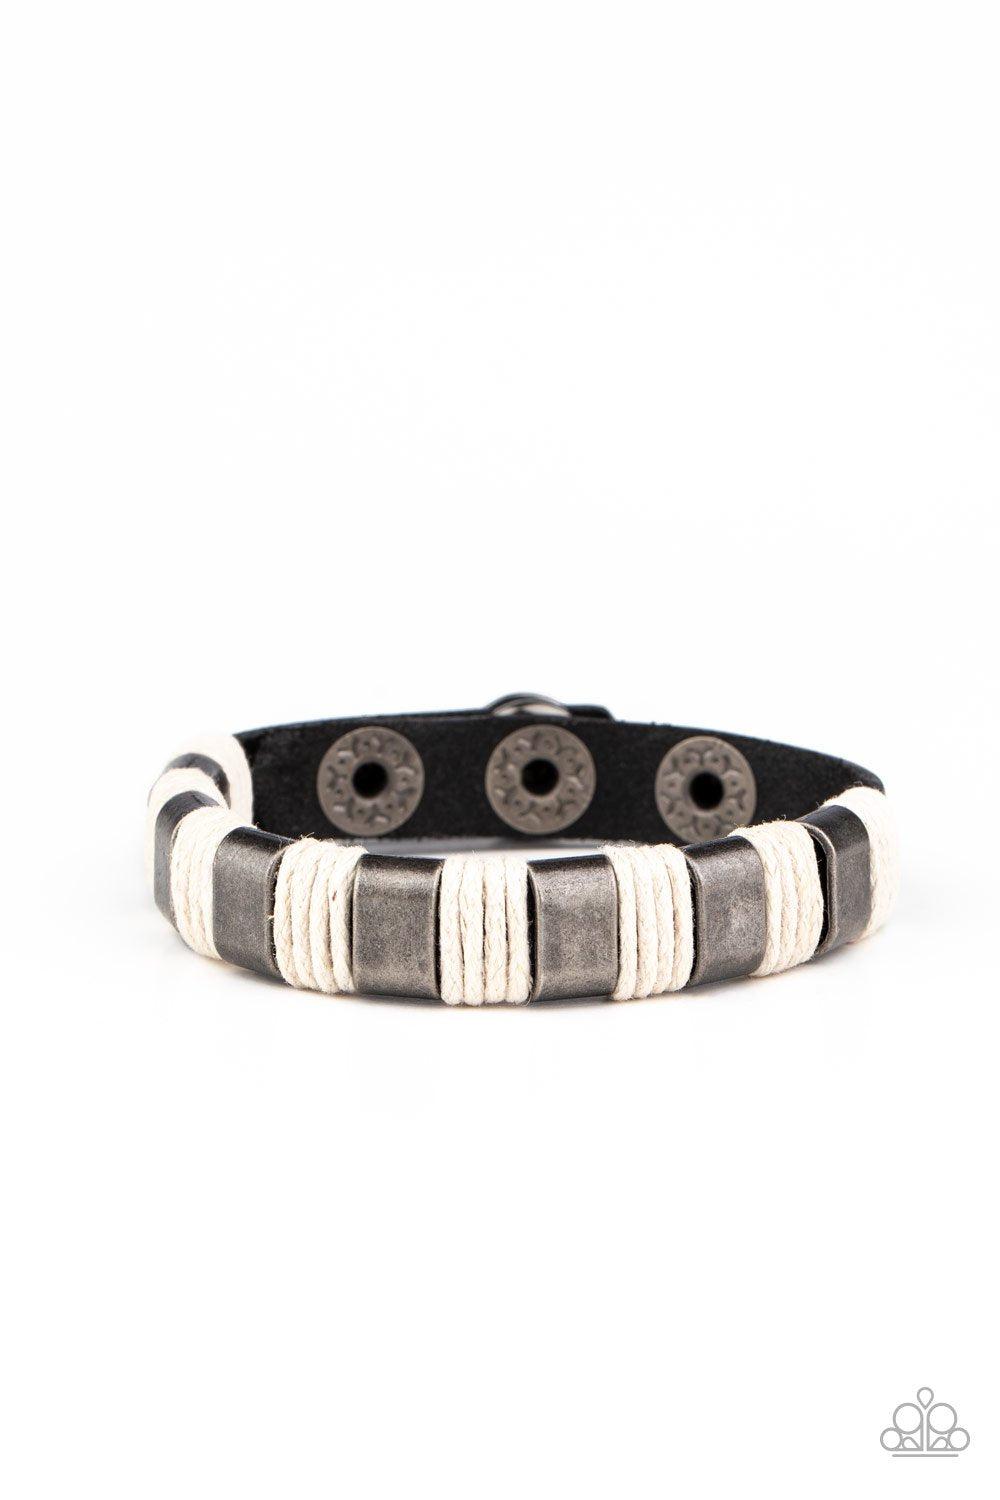 Just Ride Gunmetal and Black Leather Wrap Snap Bracelet - Paparazzi Accessories-CarasShop.com - $5 Jewelry by Cara Jewels